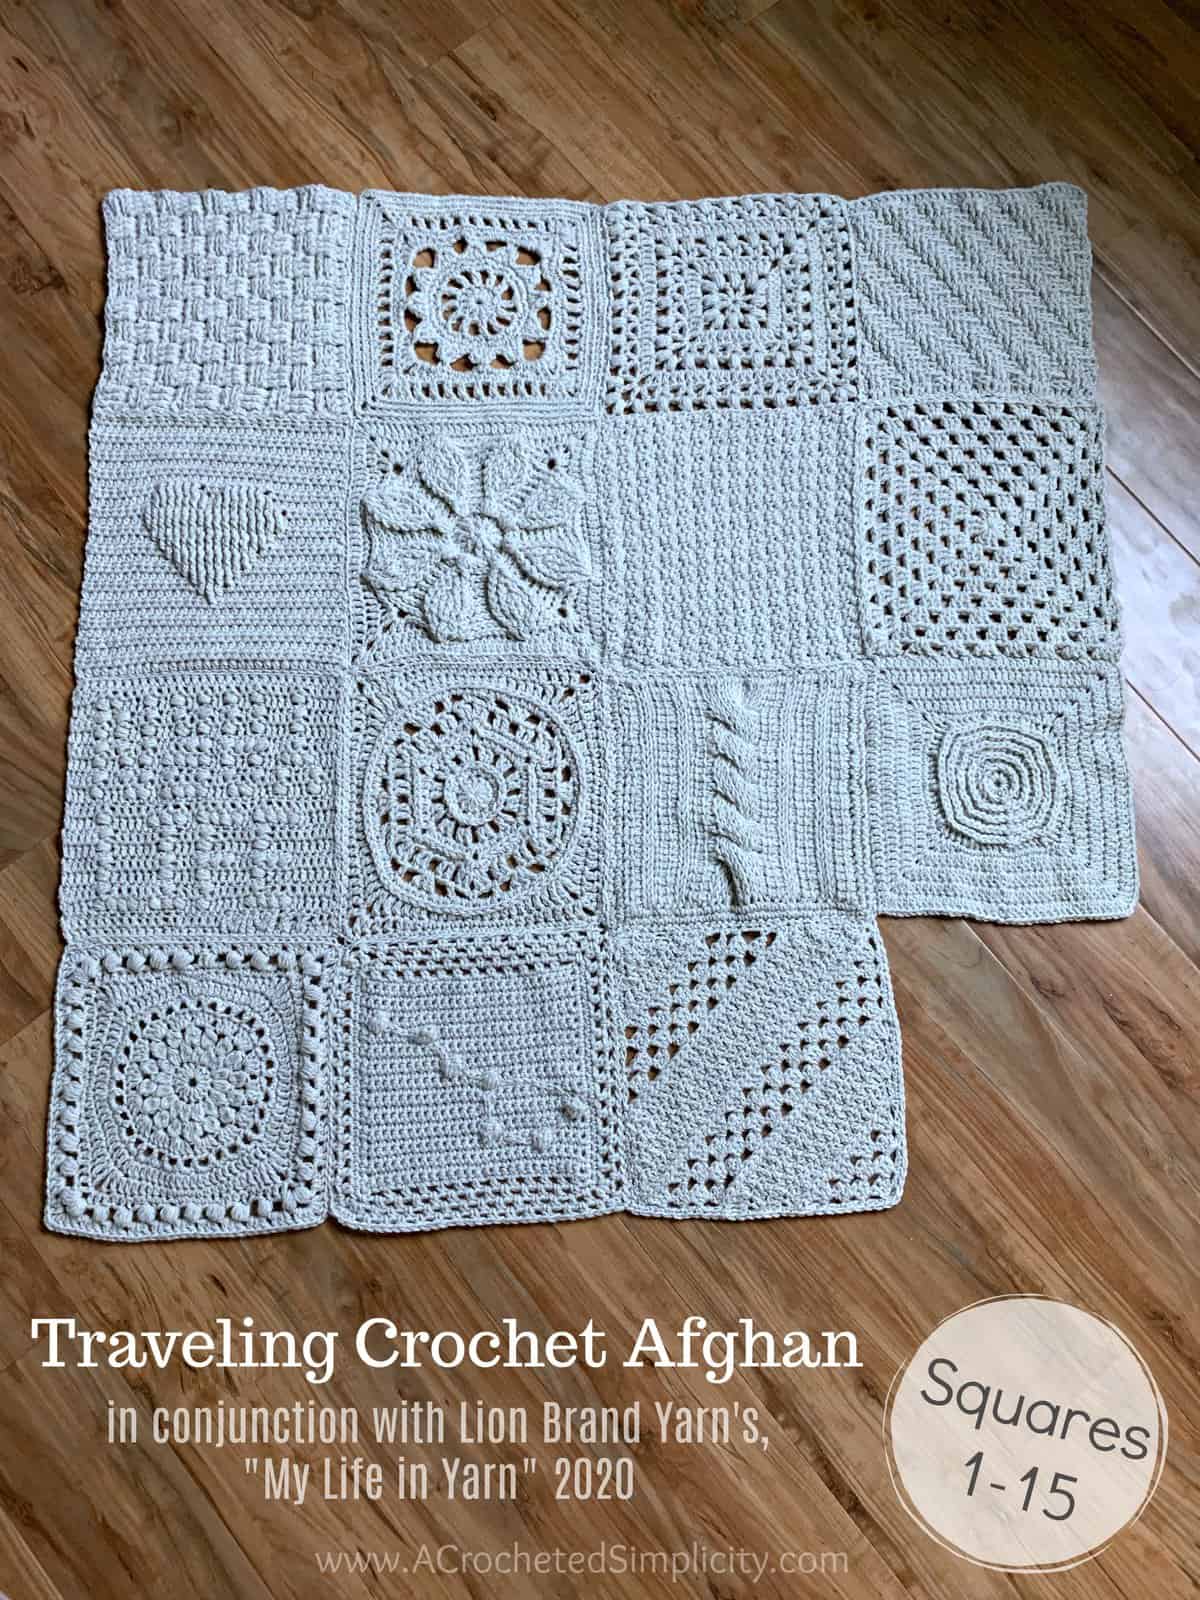 Traveling Crochet Afghan Project - "My Life in Yarn" 2020 in conjunction with Lion Brand Yarns and independent bloggers #freecrochetpattern #freecrochetsquarepattern #10inchcrochetsquare #crochetgrannysquarepattern #travelingafghan #mylifeinyarn #travelingafghans #travelingcrochetafghan